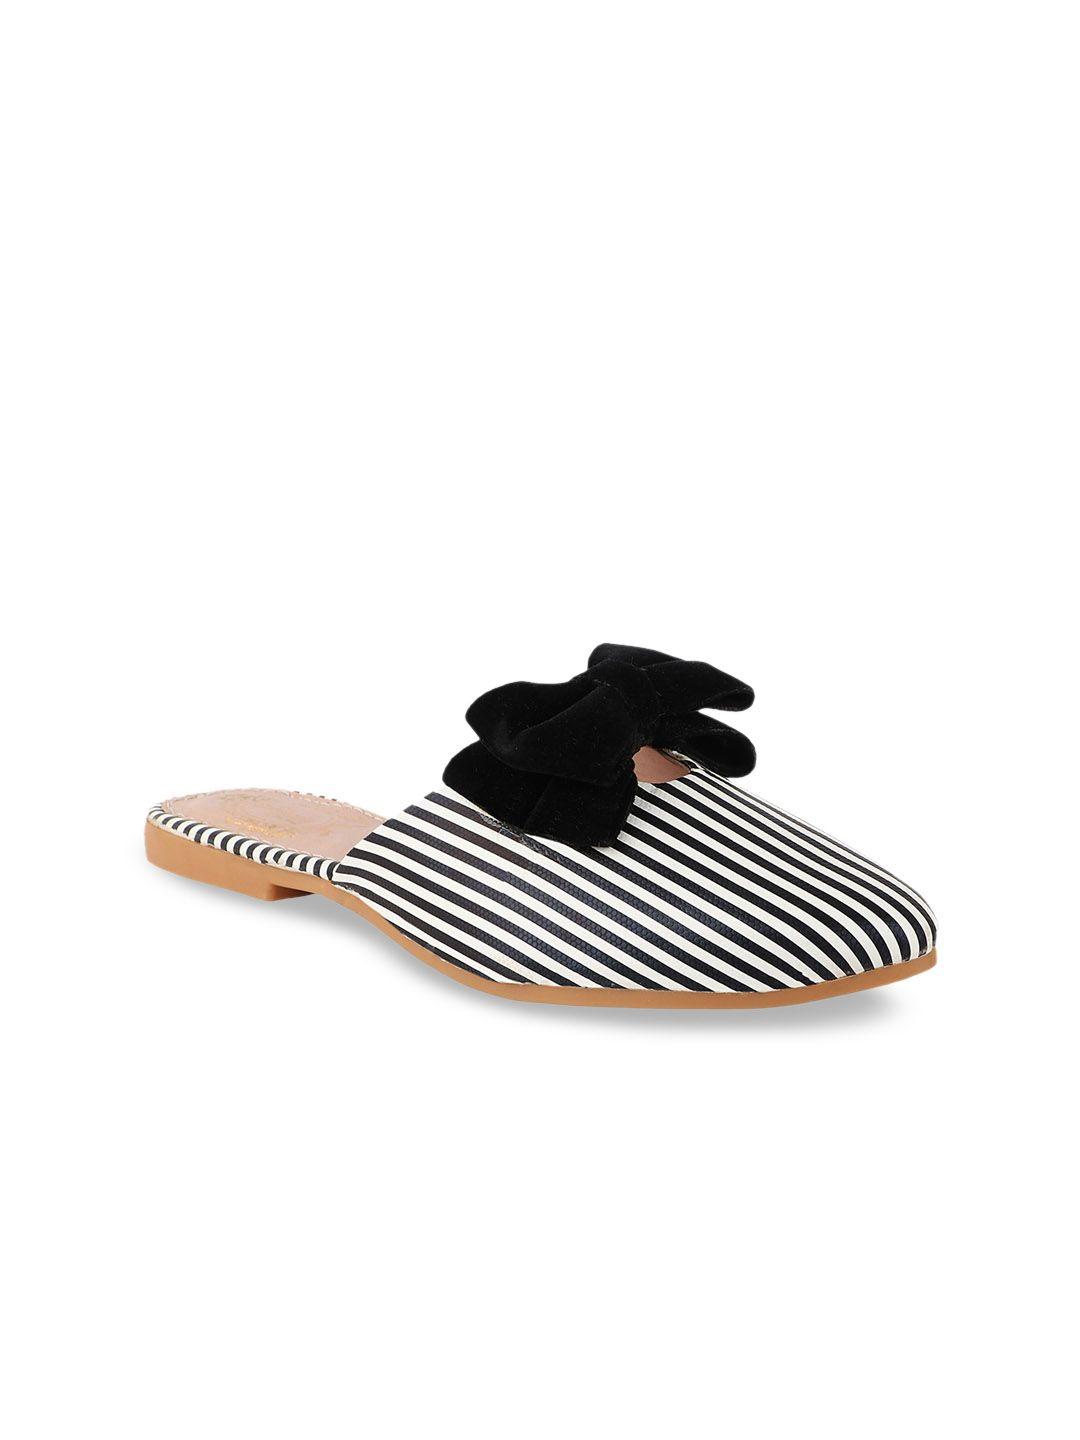 shoetopia girls black striped mules with bows